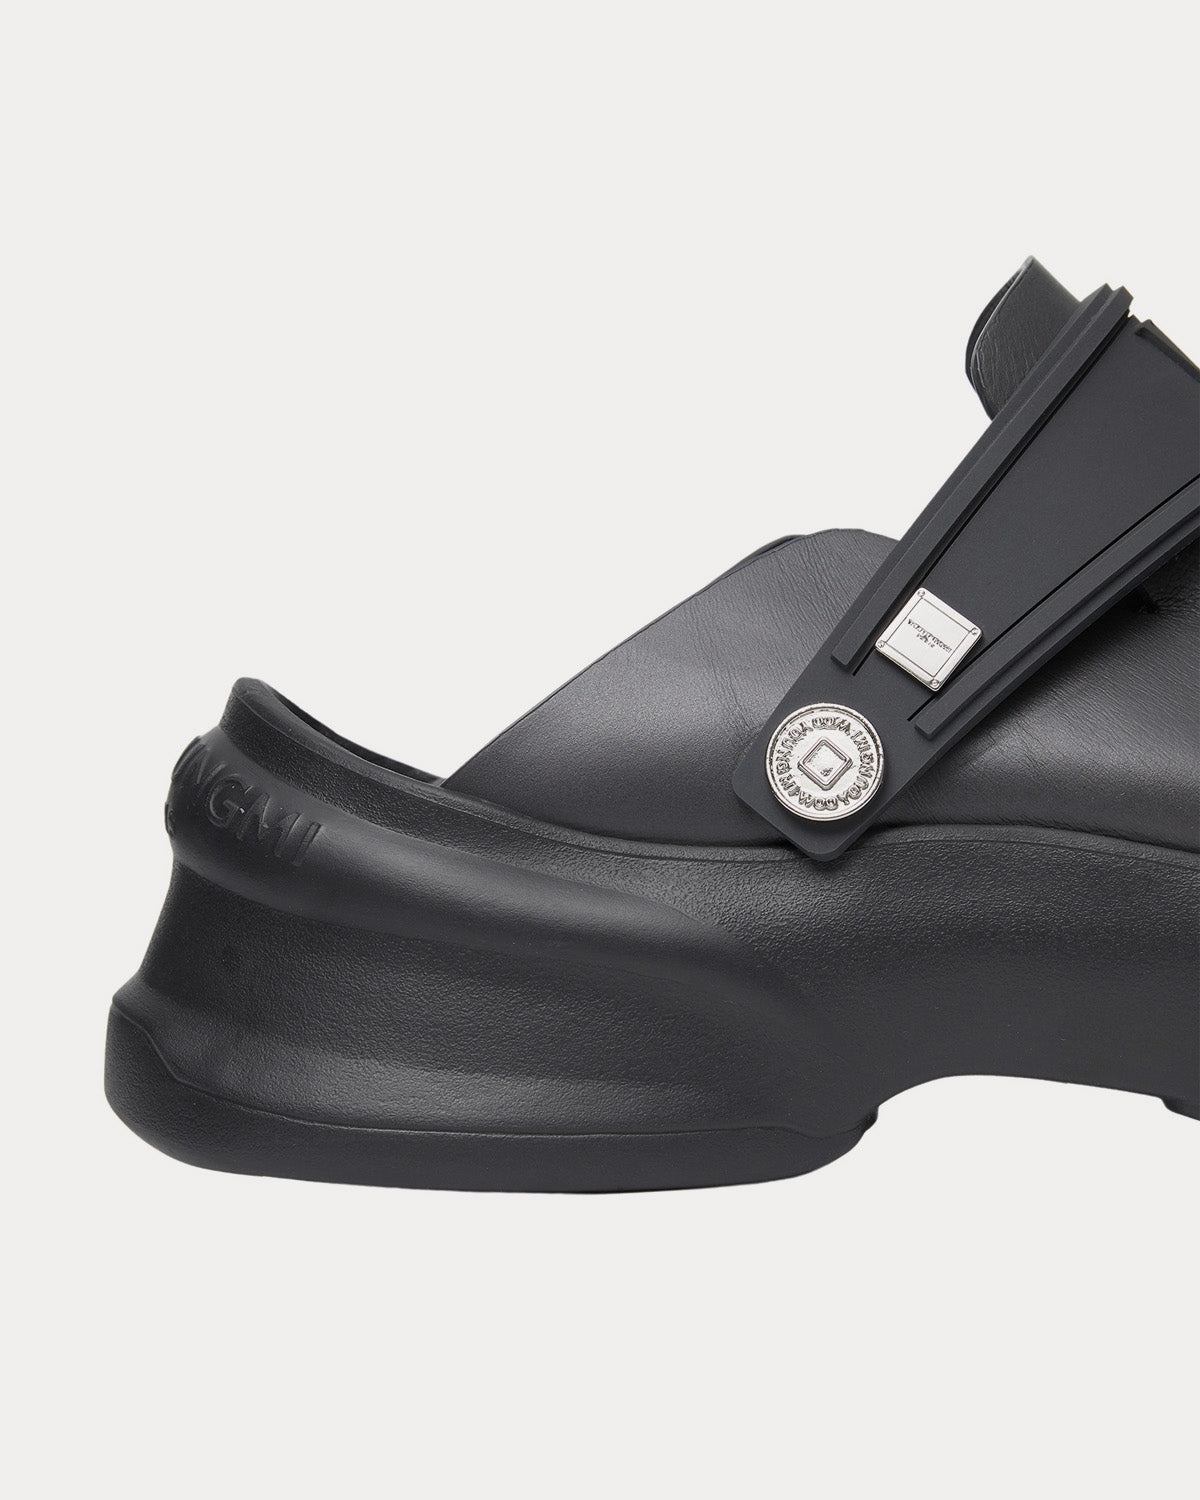 Wooyoungmi - Slingback Leather Grey Clogs